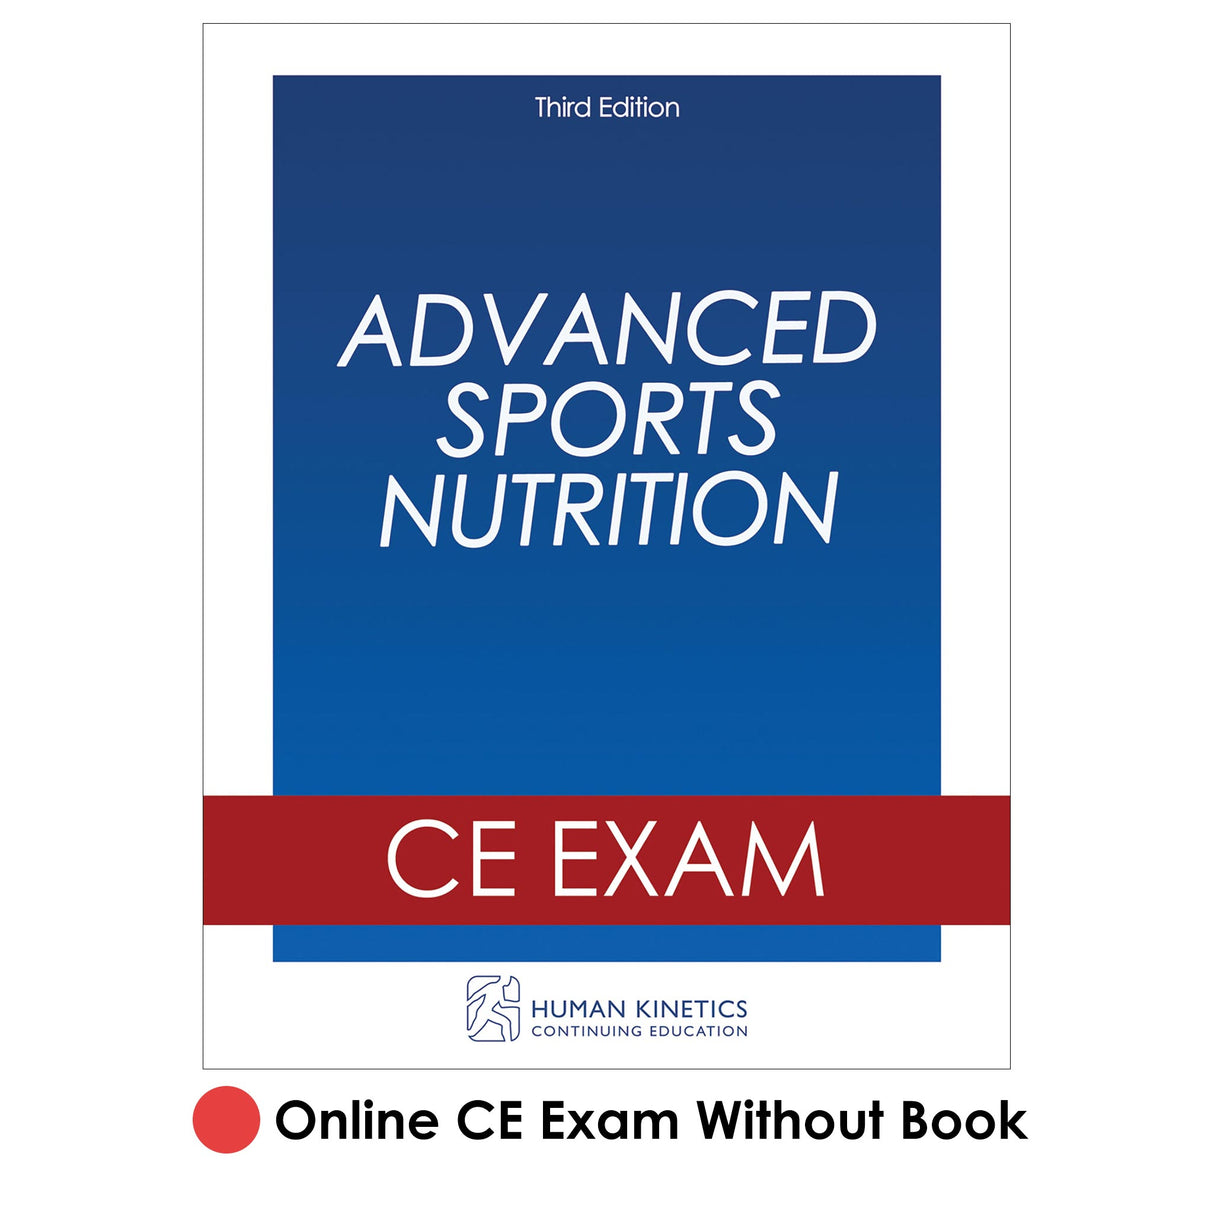 Advanced Sports Nutrition 3rd Edition Online CE Exam Without Book